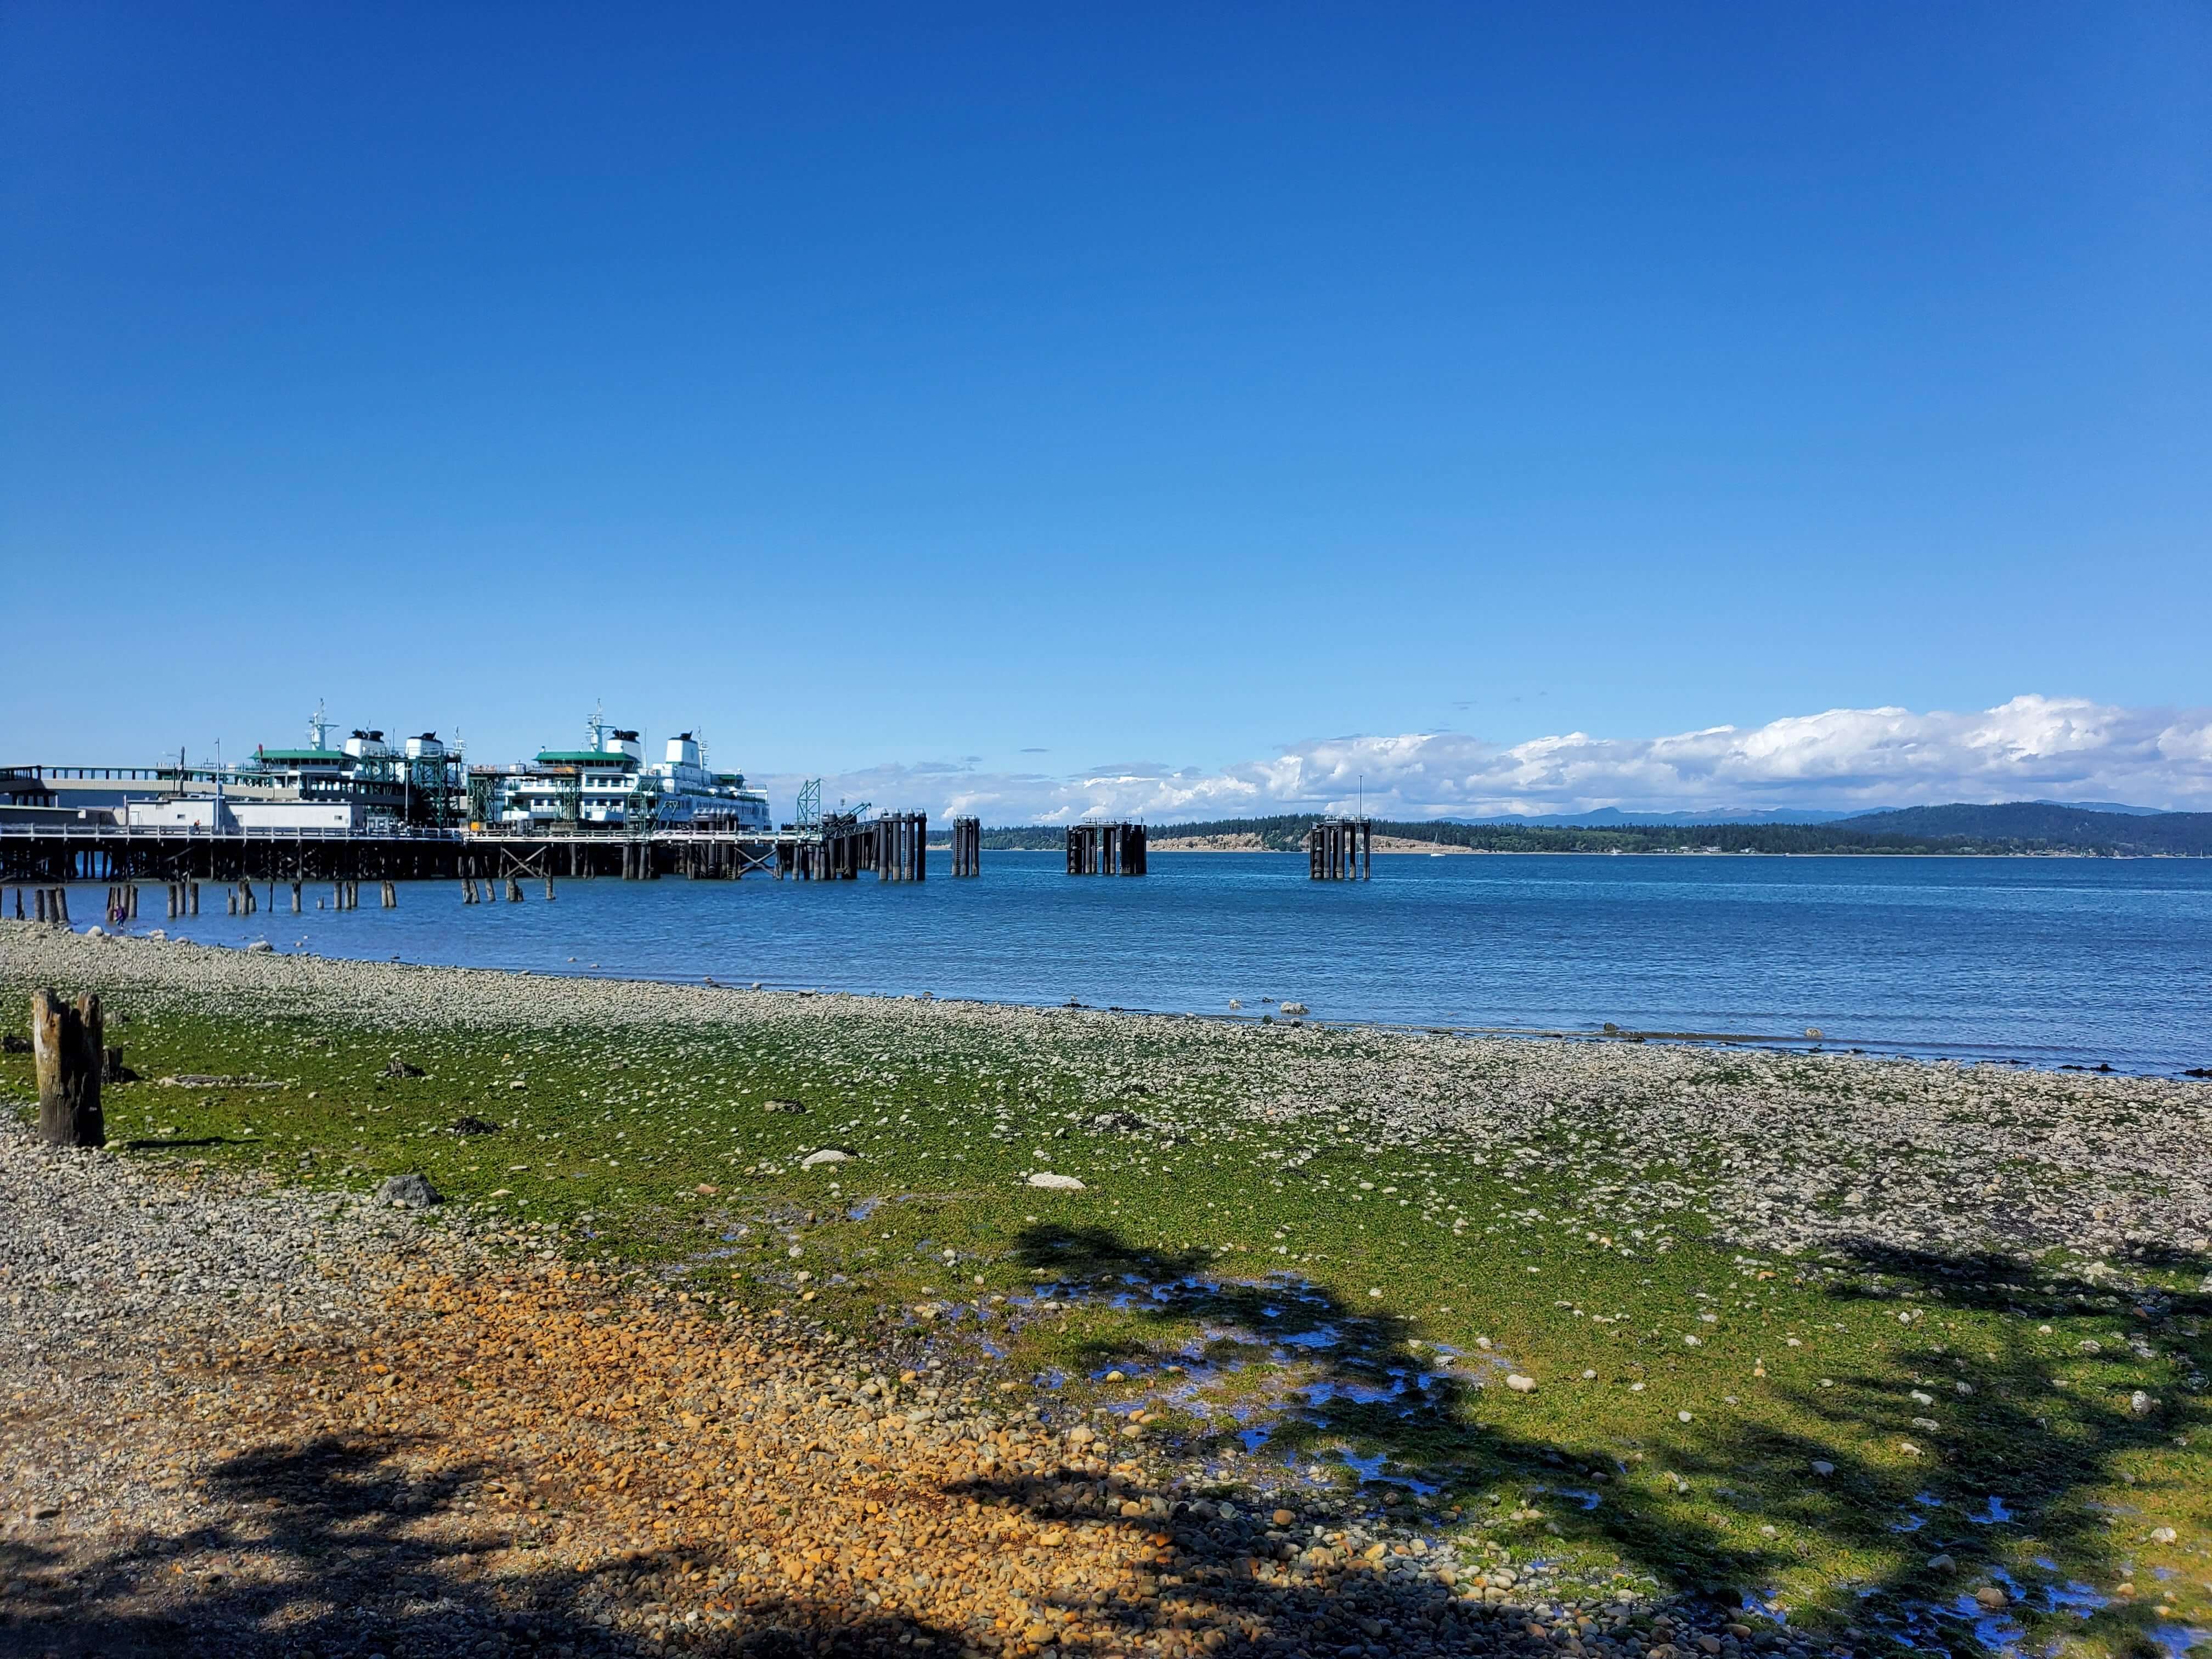 View of a ferry and the surrounding water at the Anacortes ferry terminal